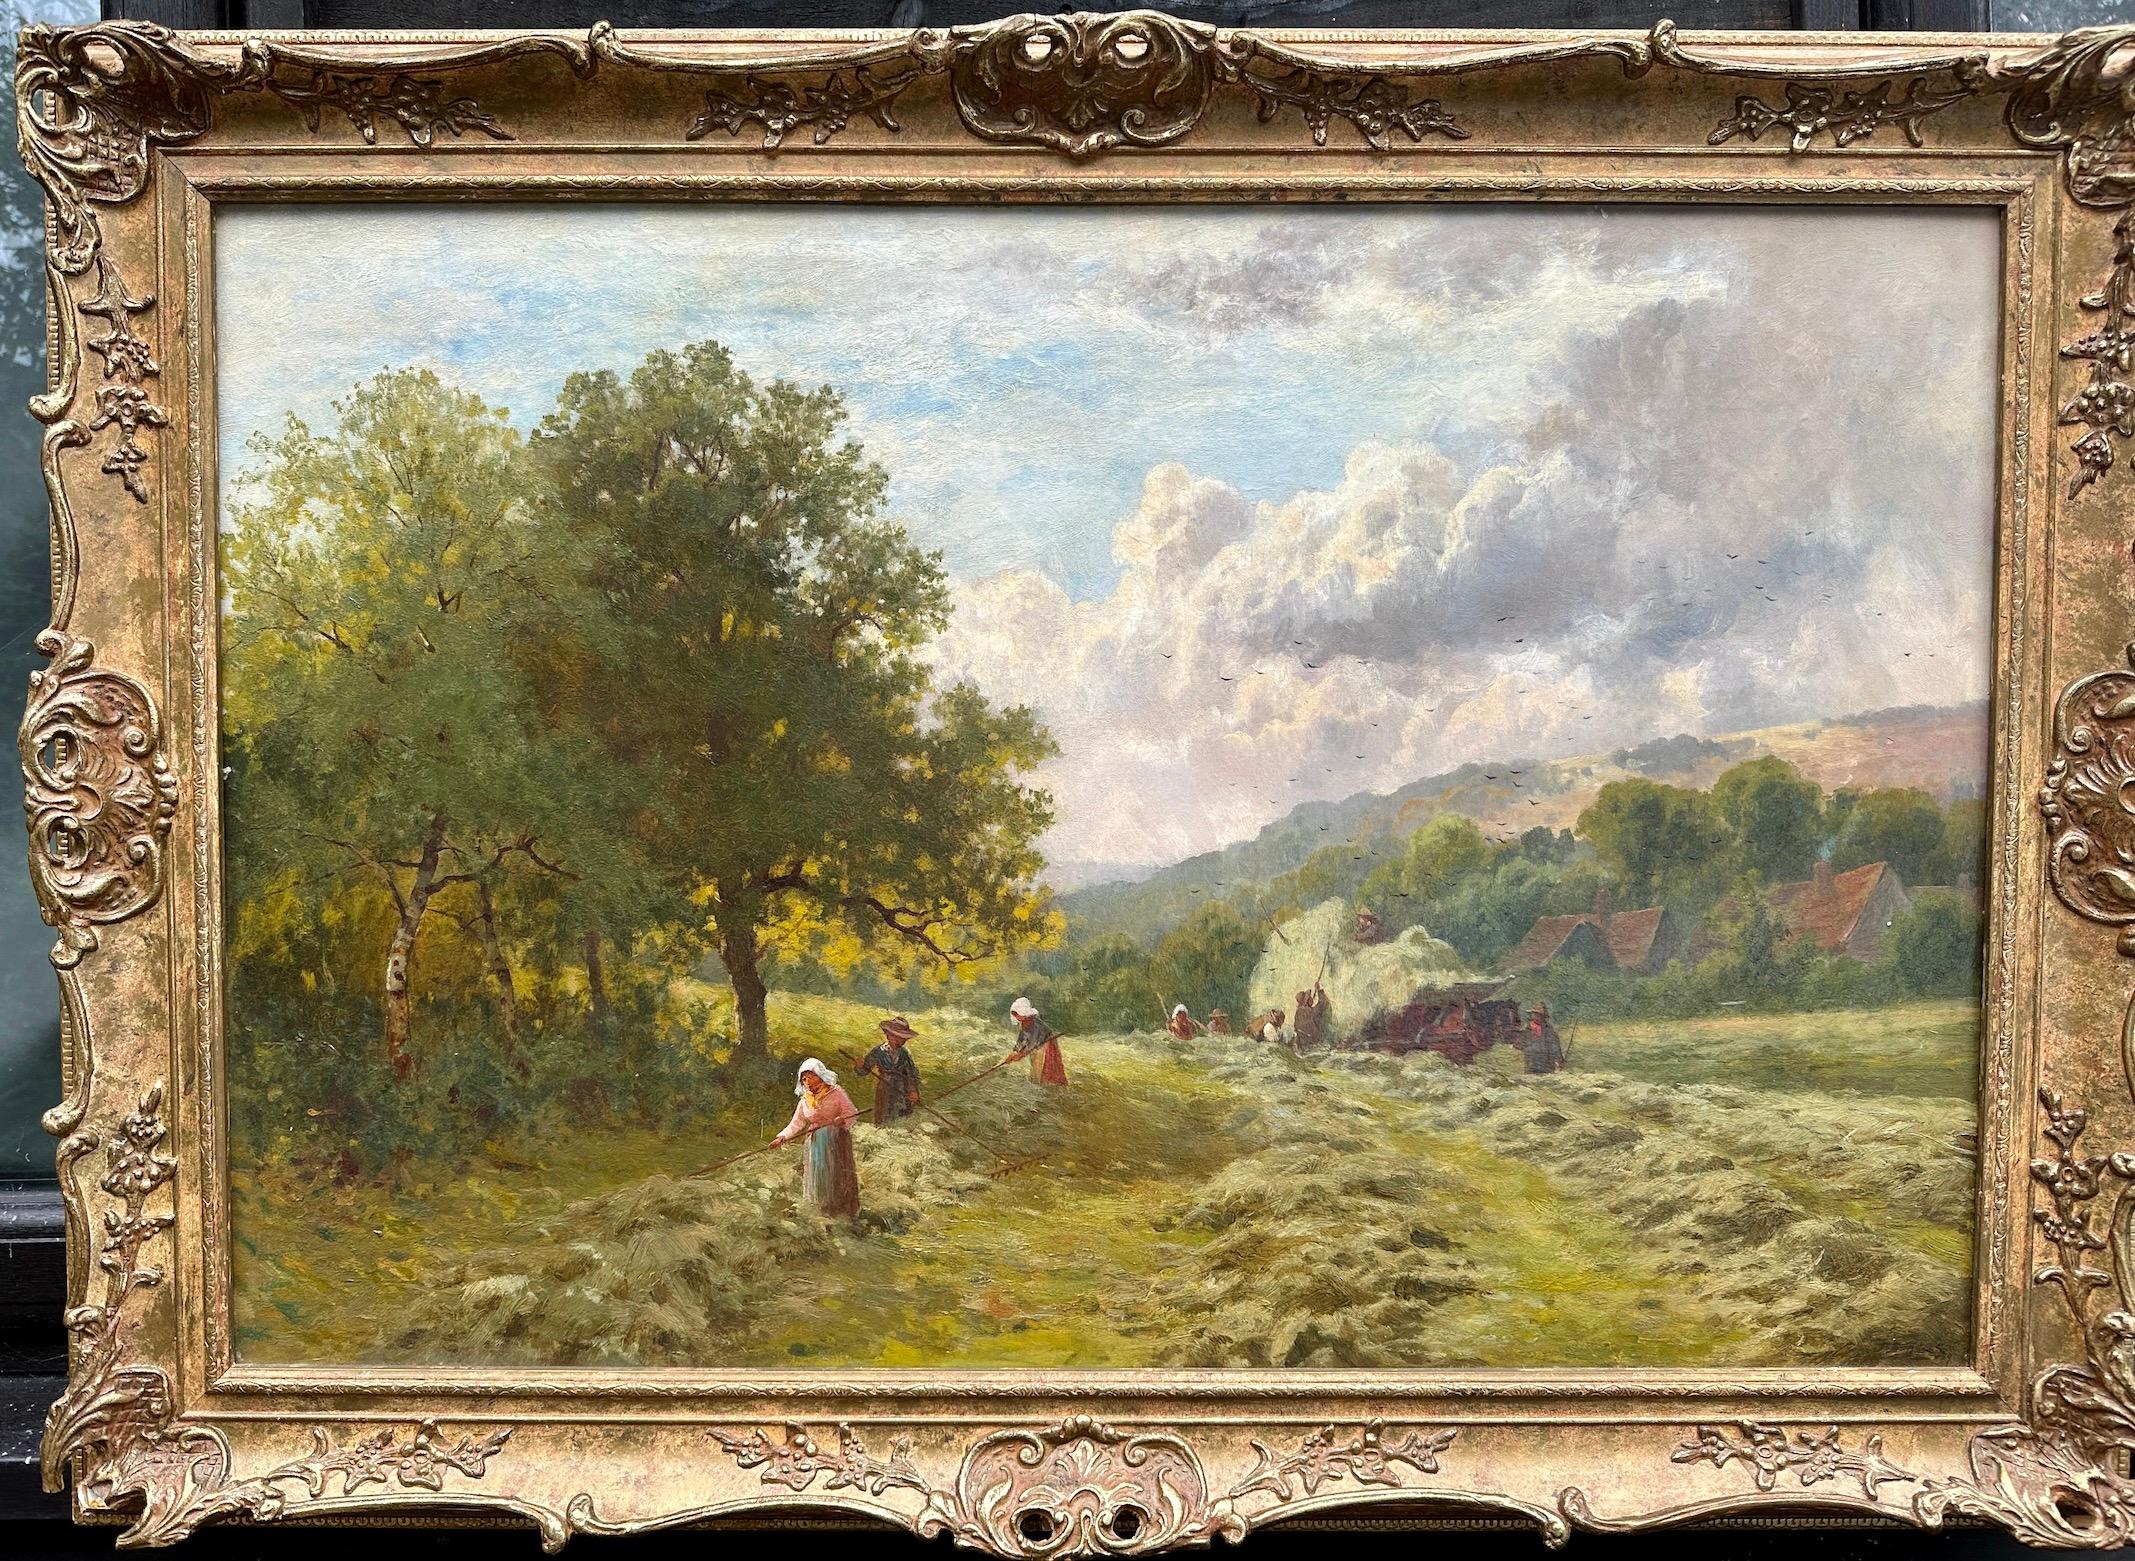 John Seymour Adams Figurative Painting - English Antique landscape with farmers harvesting in a field collecting hay